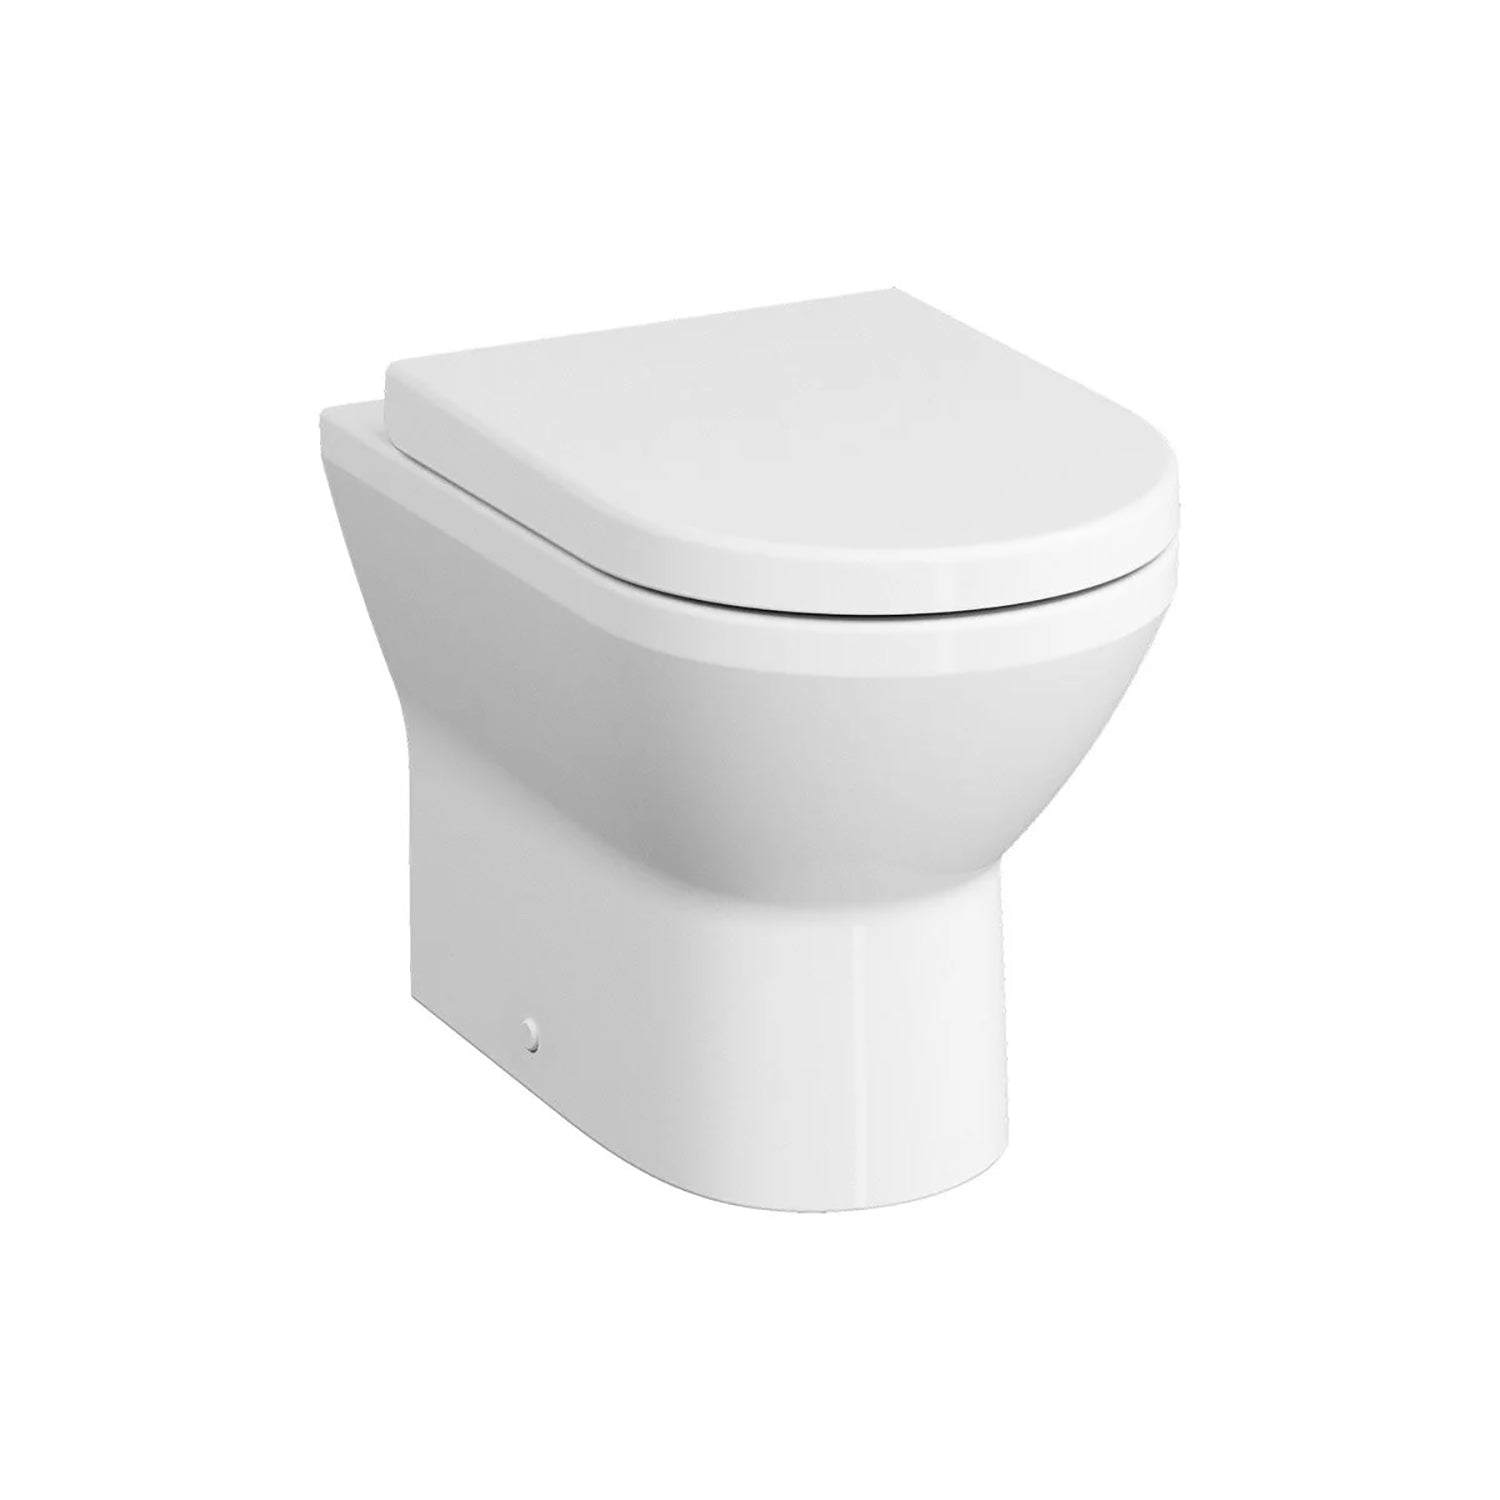 Vesta back to wall toilet in a white finish, 400mm with seat and cover included on a white background.